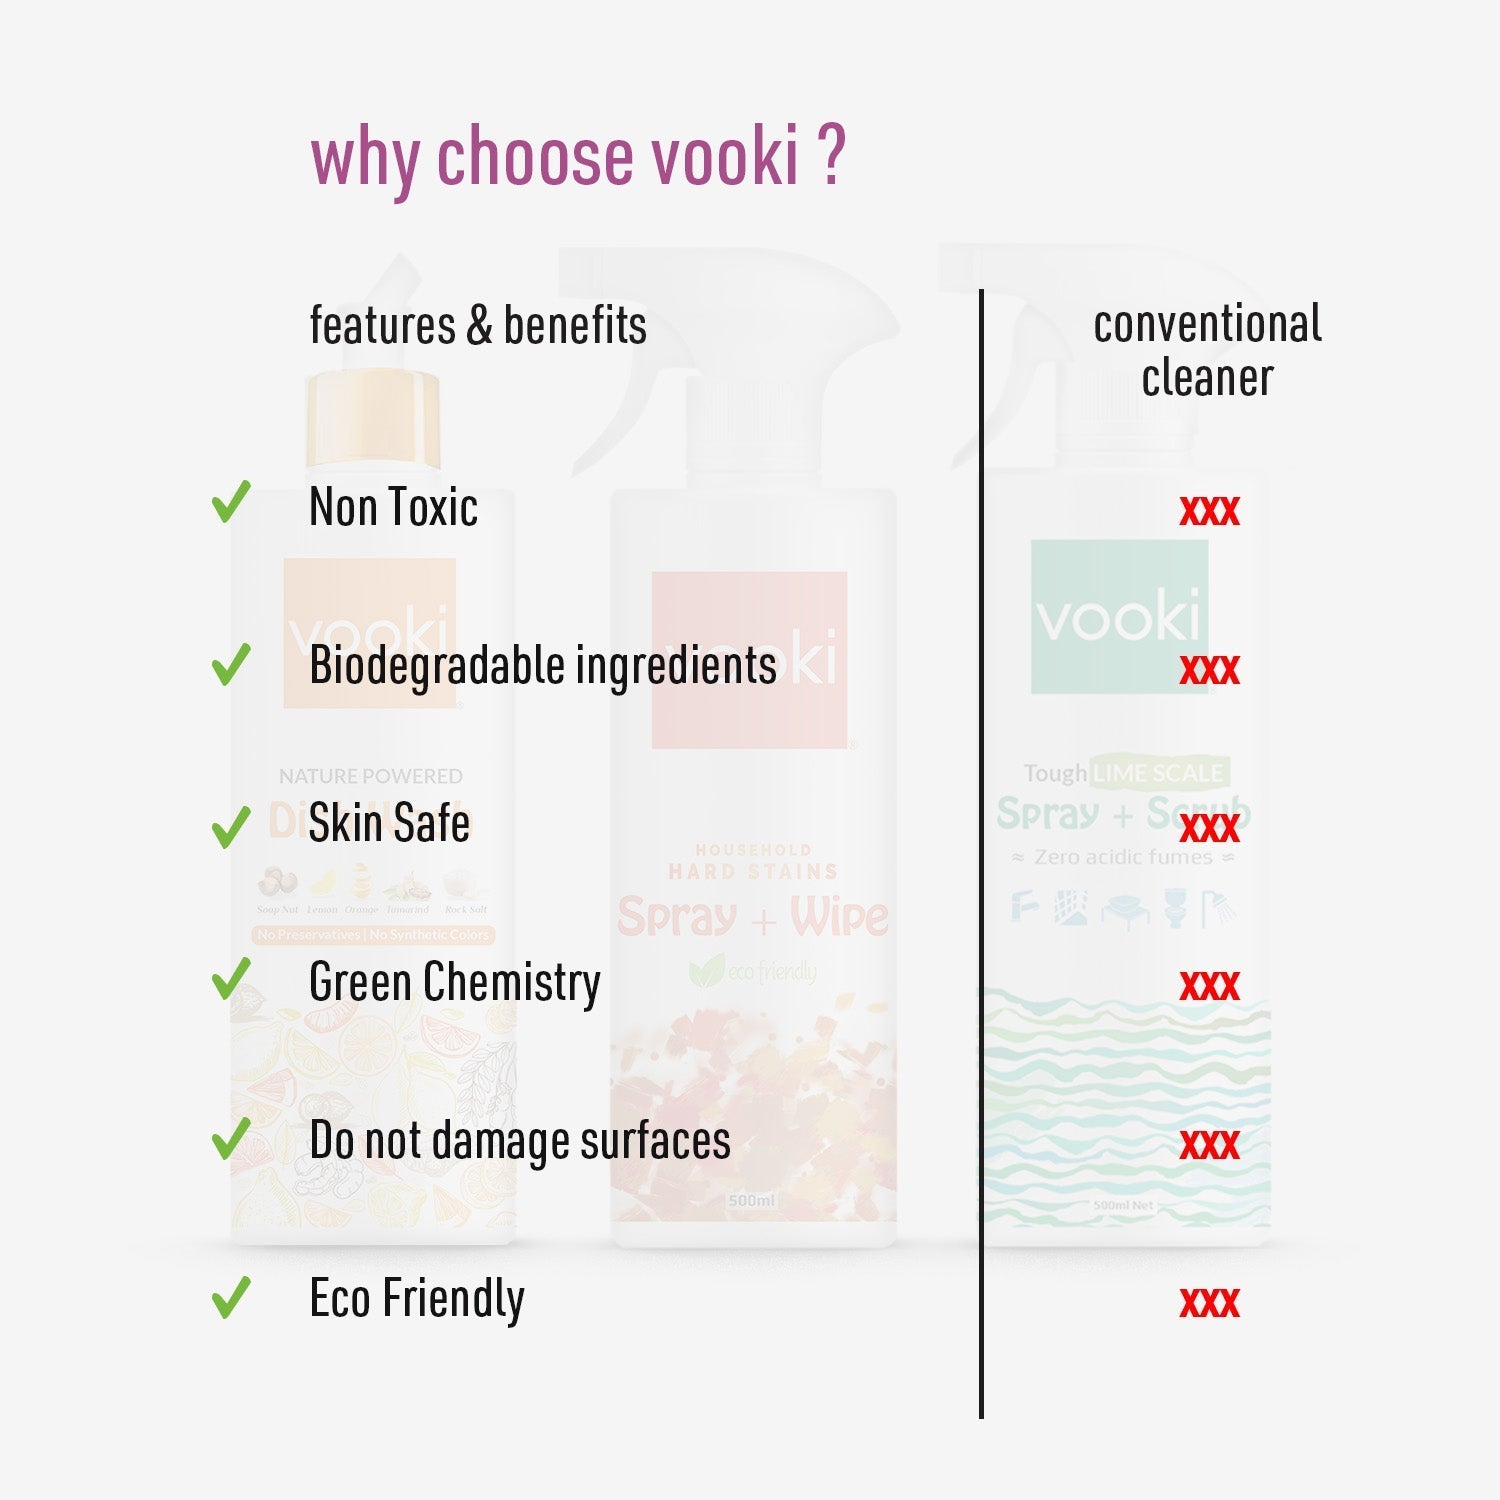 A compelling image asking why to choose vooki, a reliable and innovative solution.